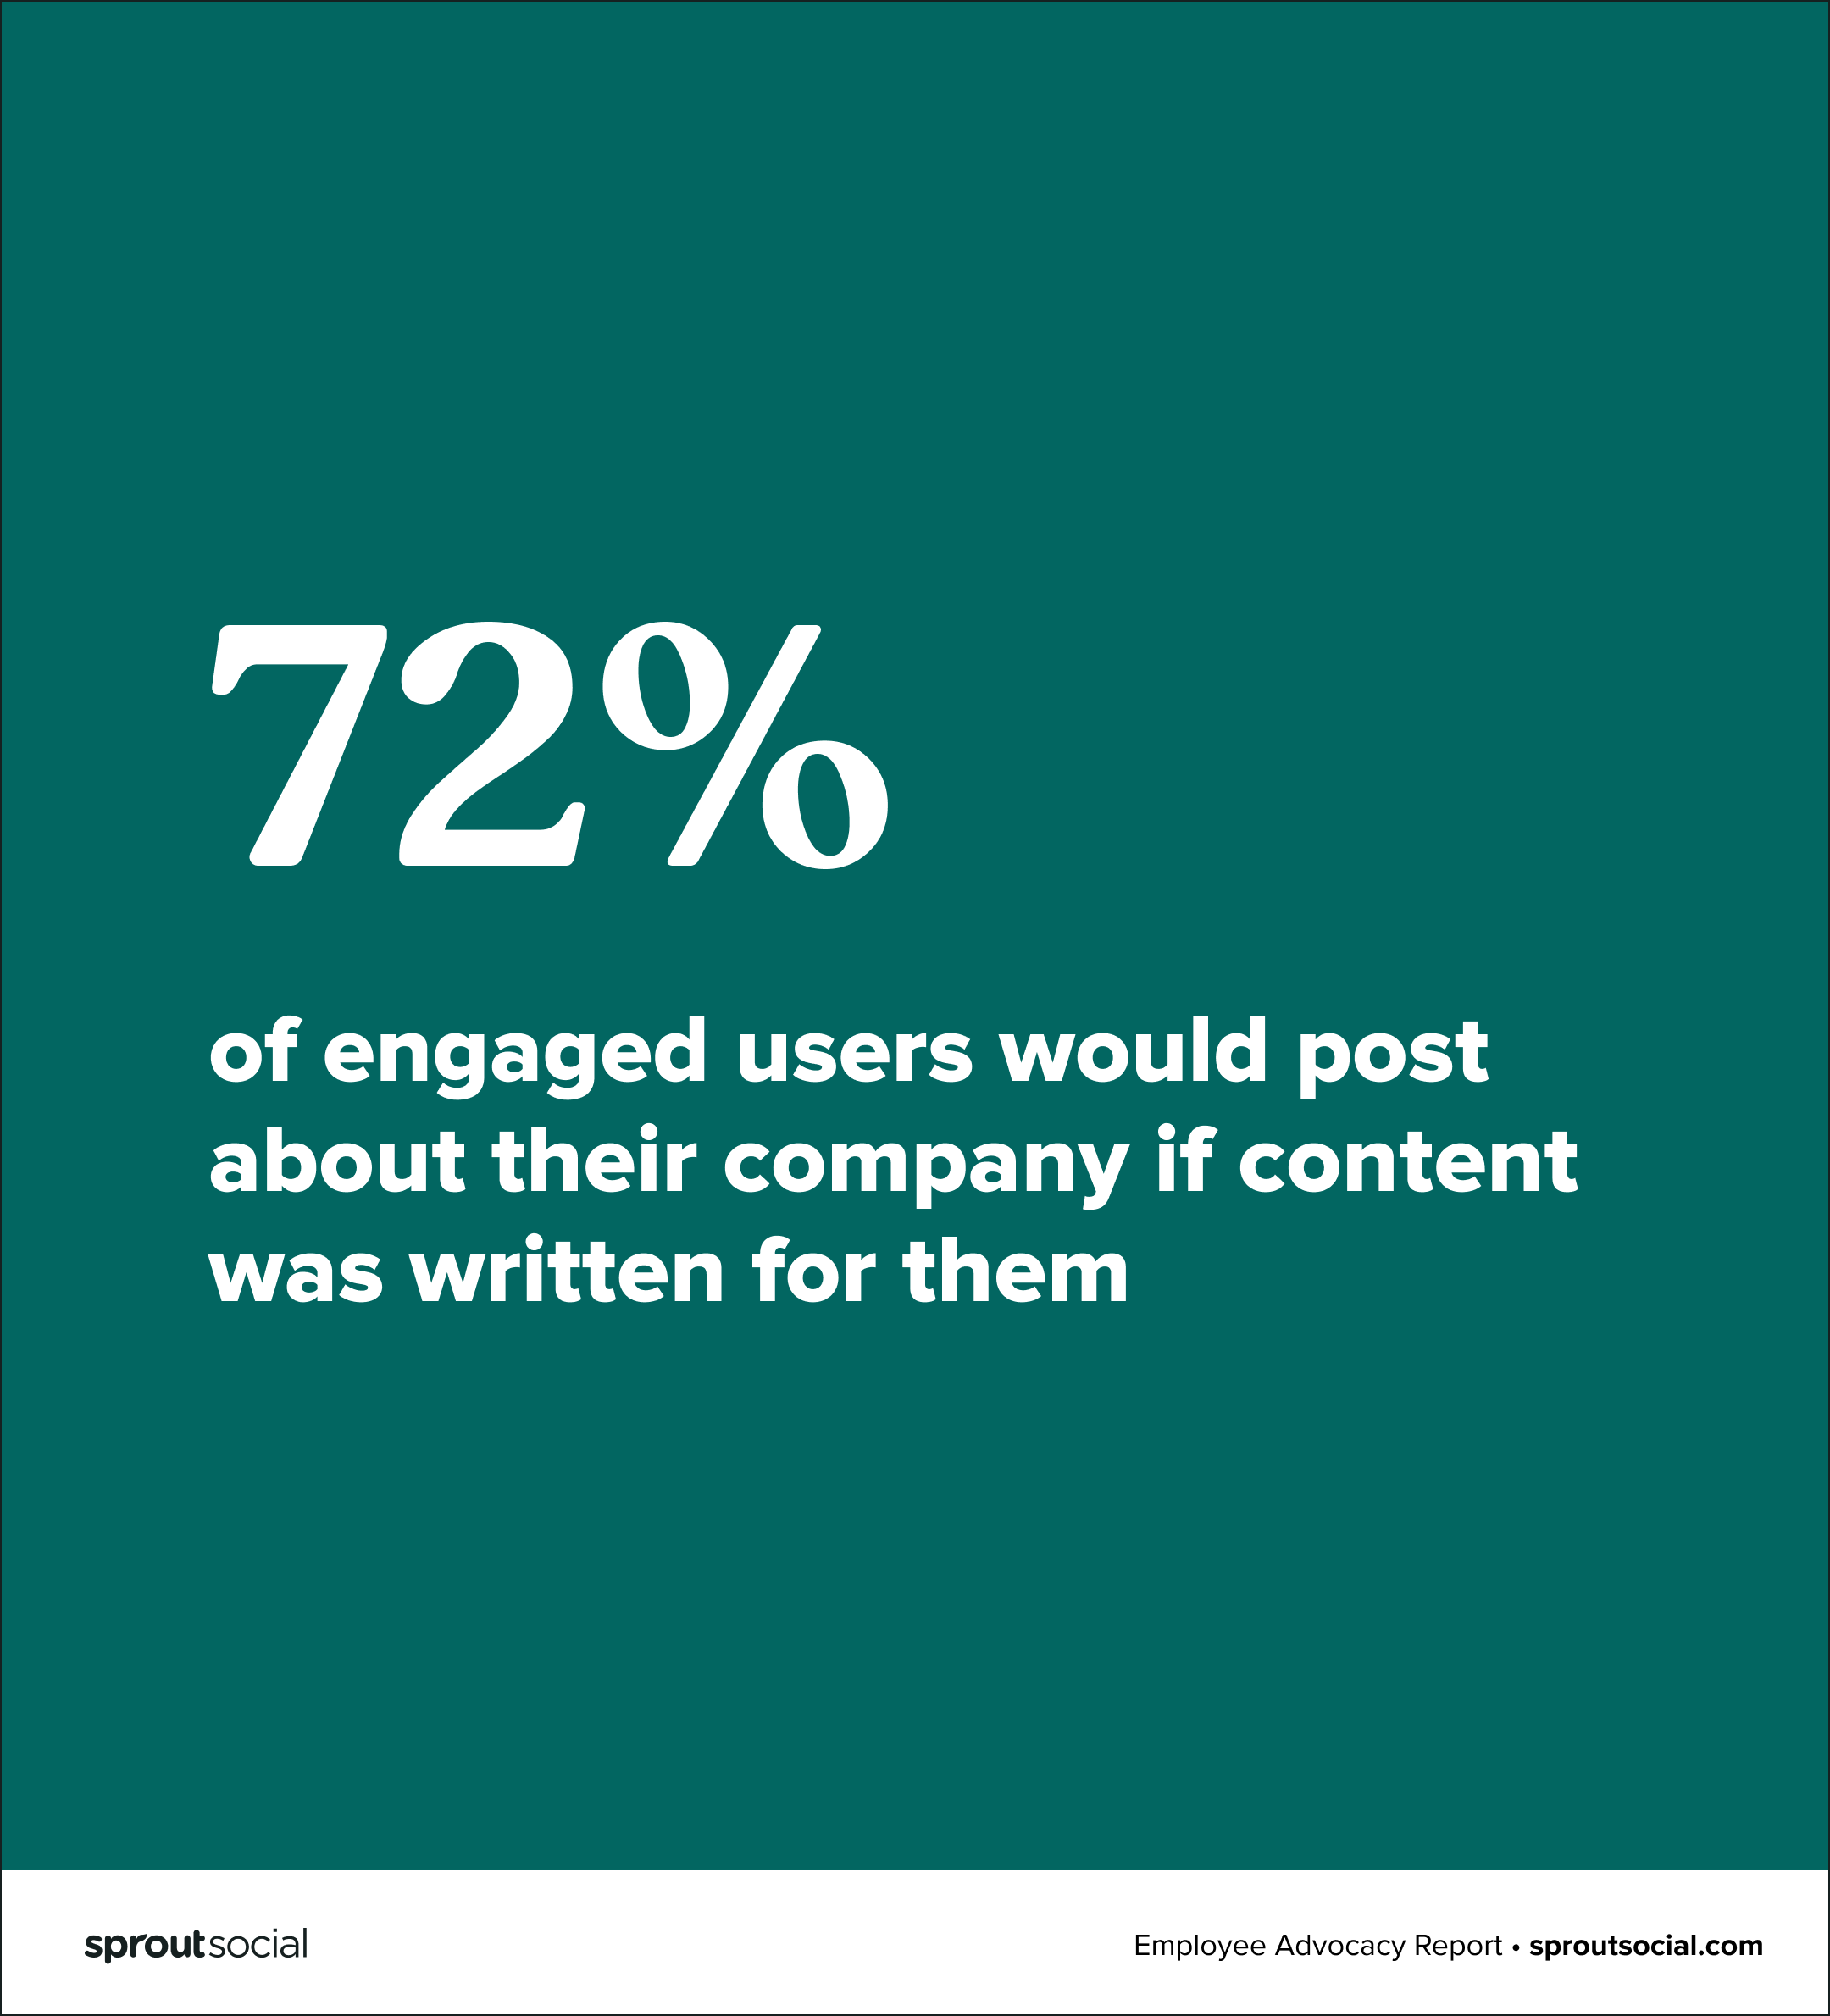 72% of engaged users would post about their company if content was written for them